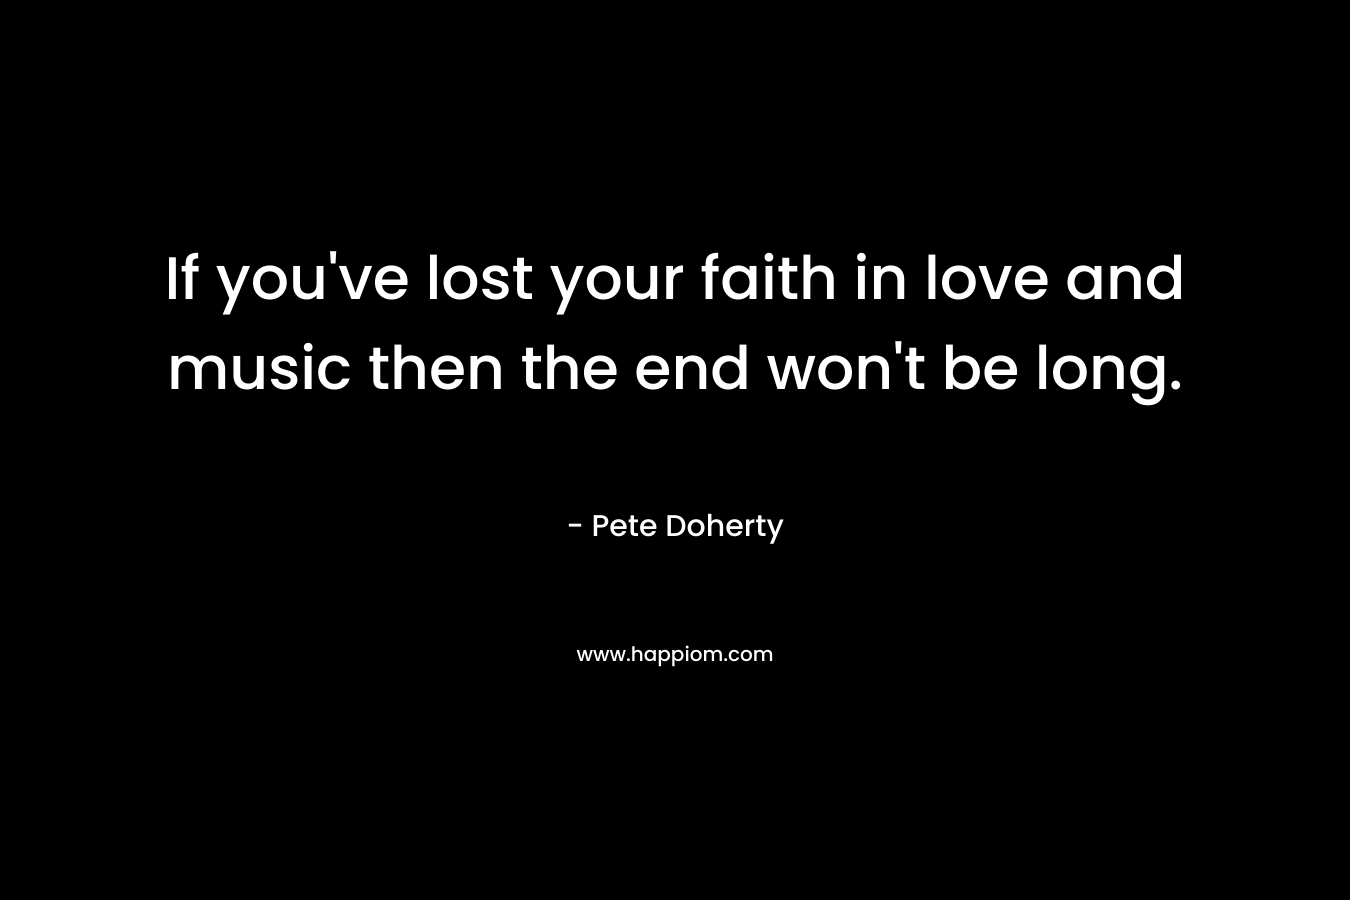 If you've lost your faith in love and music then the end won't be long.